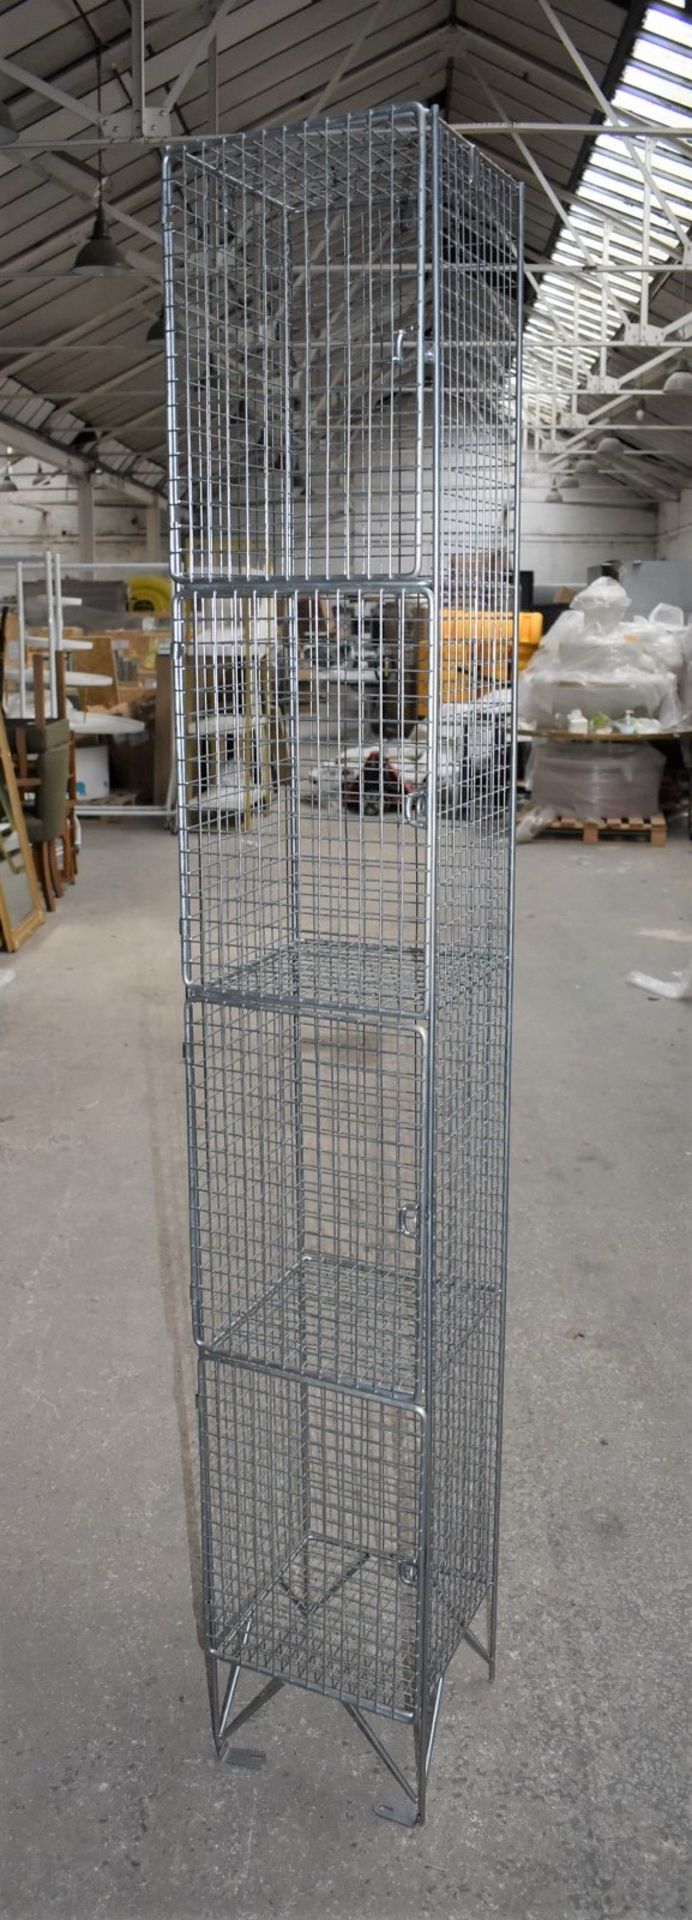 1 x Wire Mesh Cage Lockers With Four Locker Compartments - Dimensions: H193 x W30 x D32 cms - Ref: - Image 8 of 11